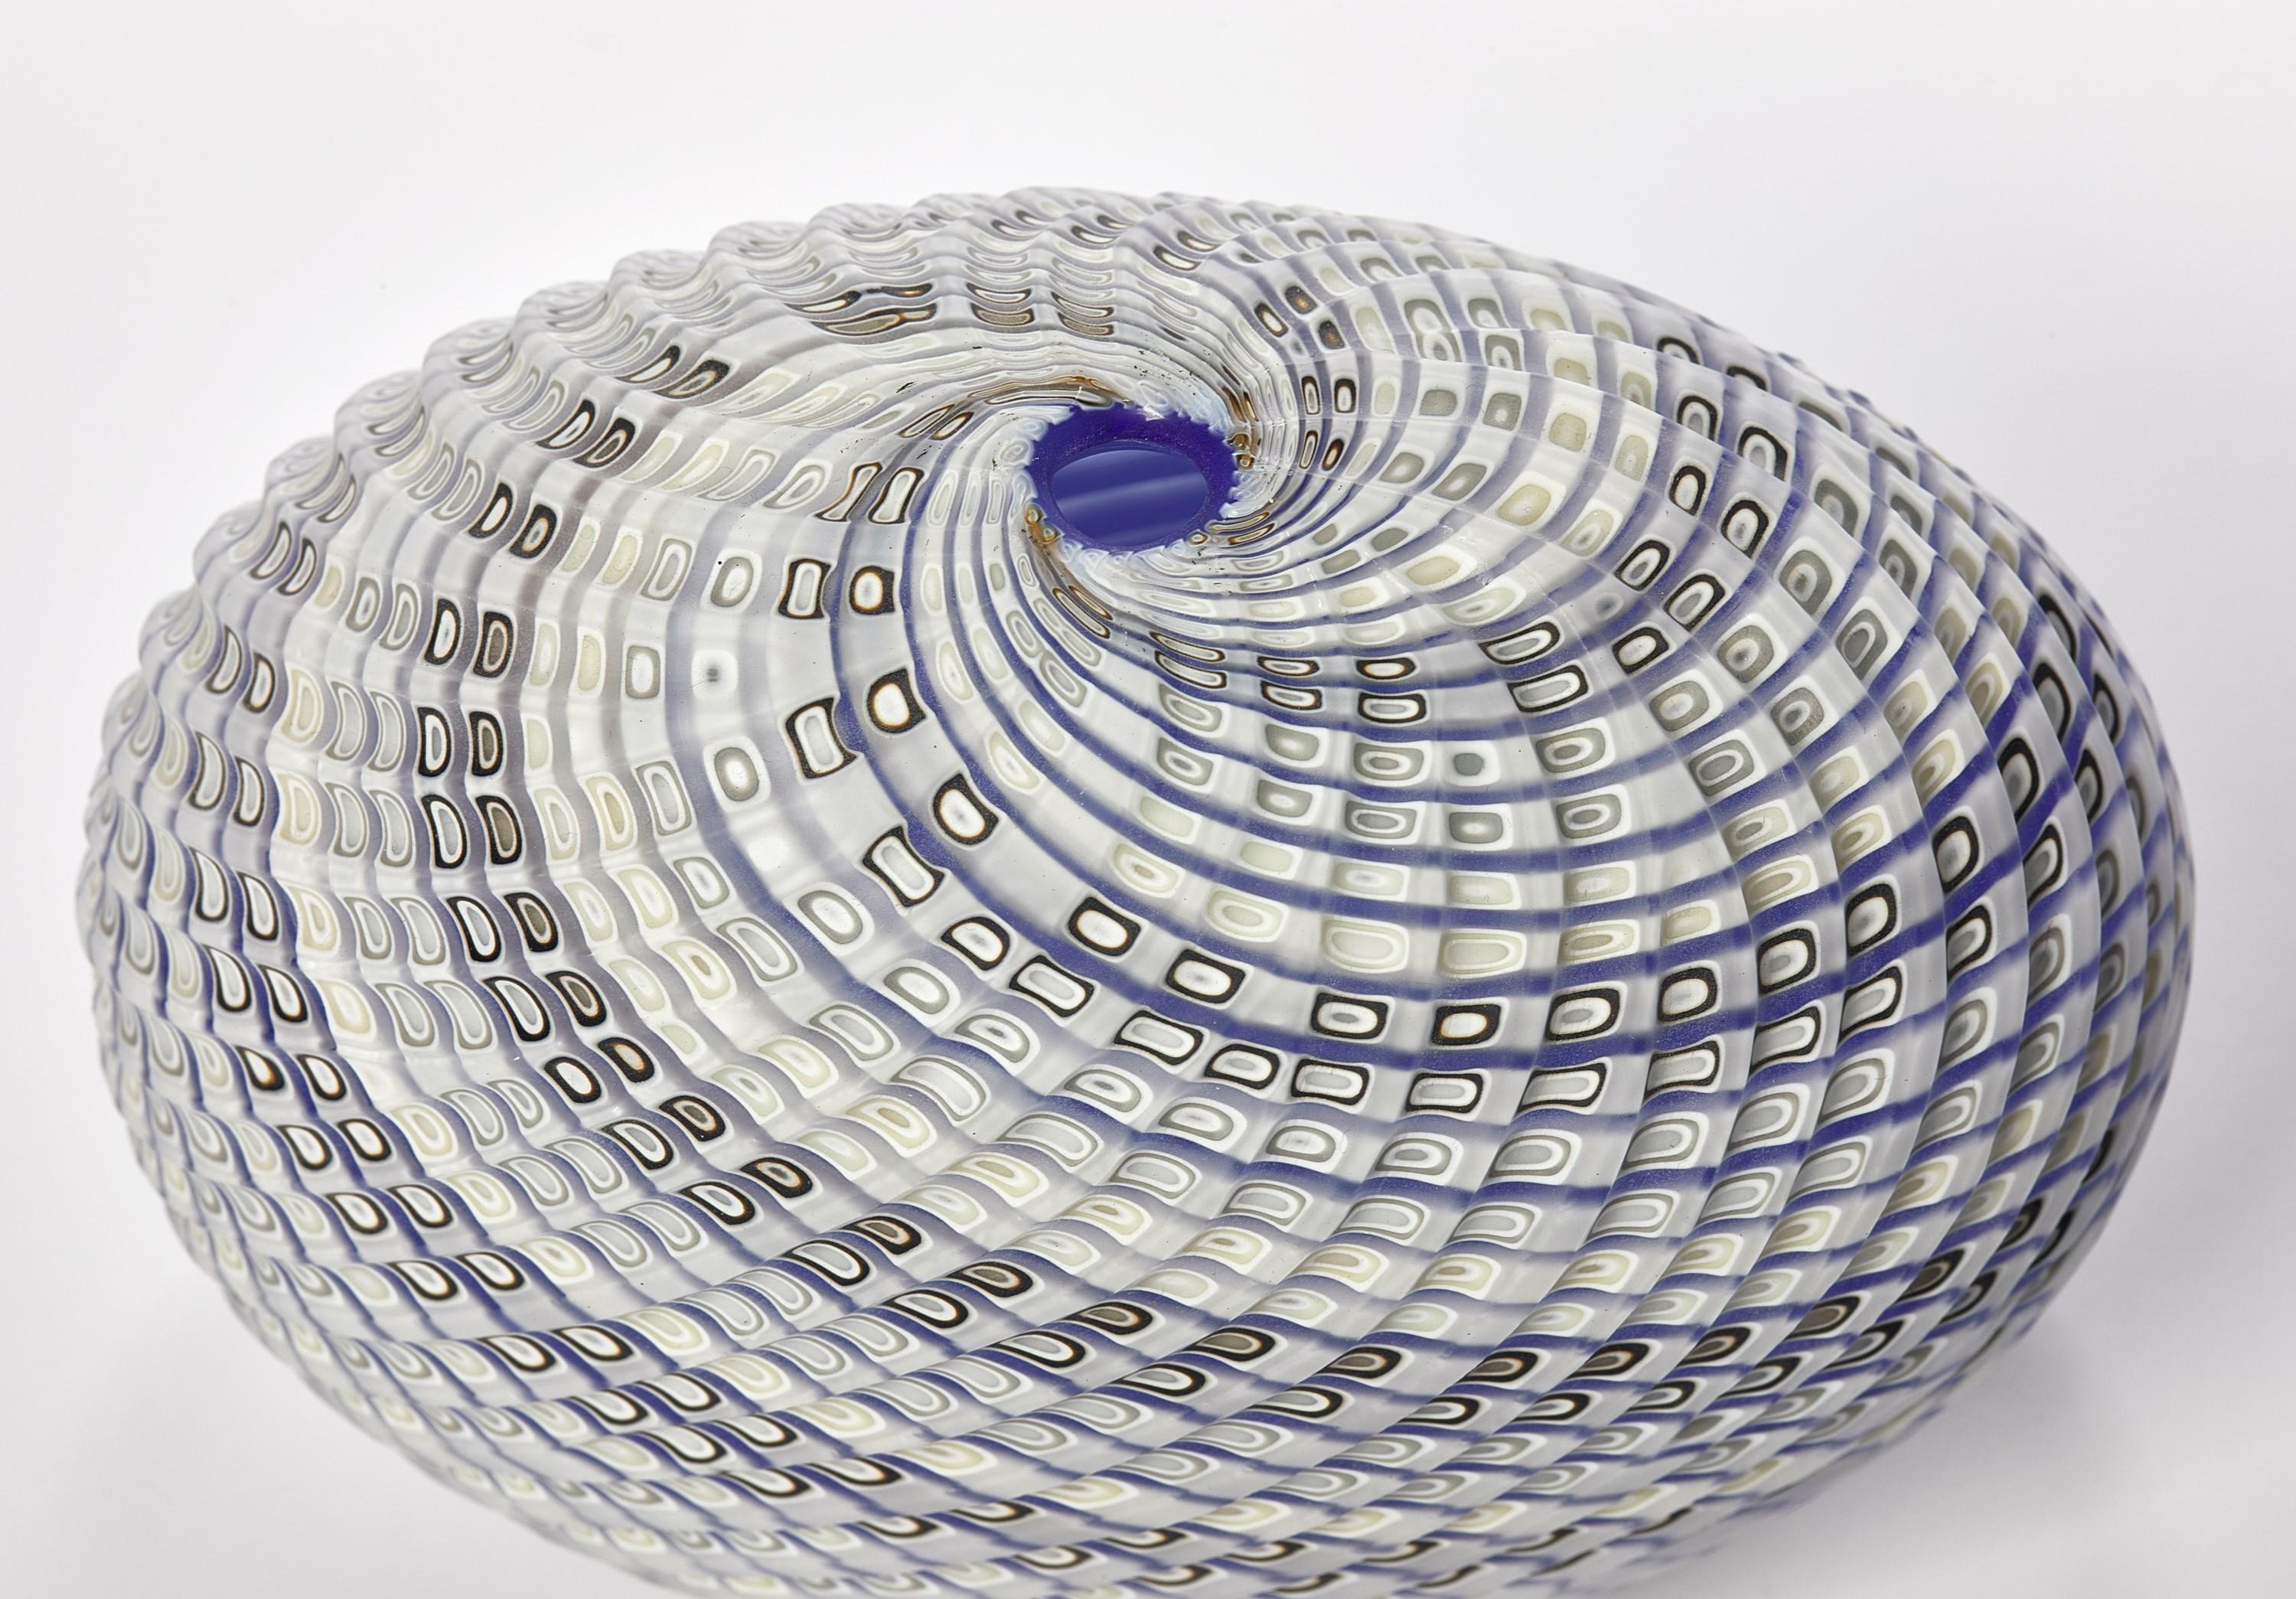 Organic Modern Woven Three Tone Blue Pebble, textured glass sculptural object by Layne Rowe For Sale